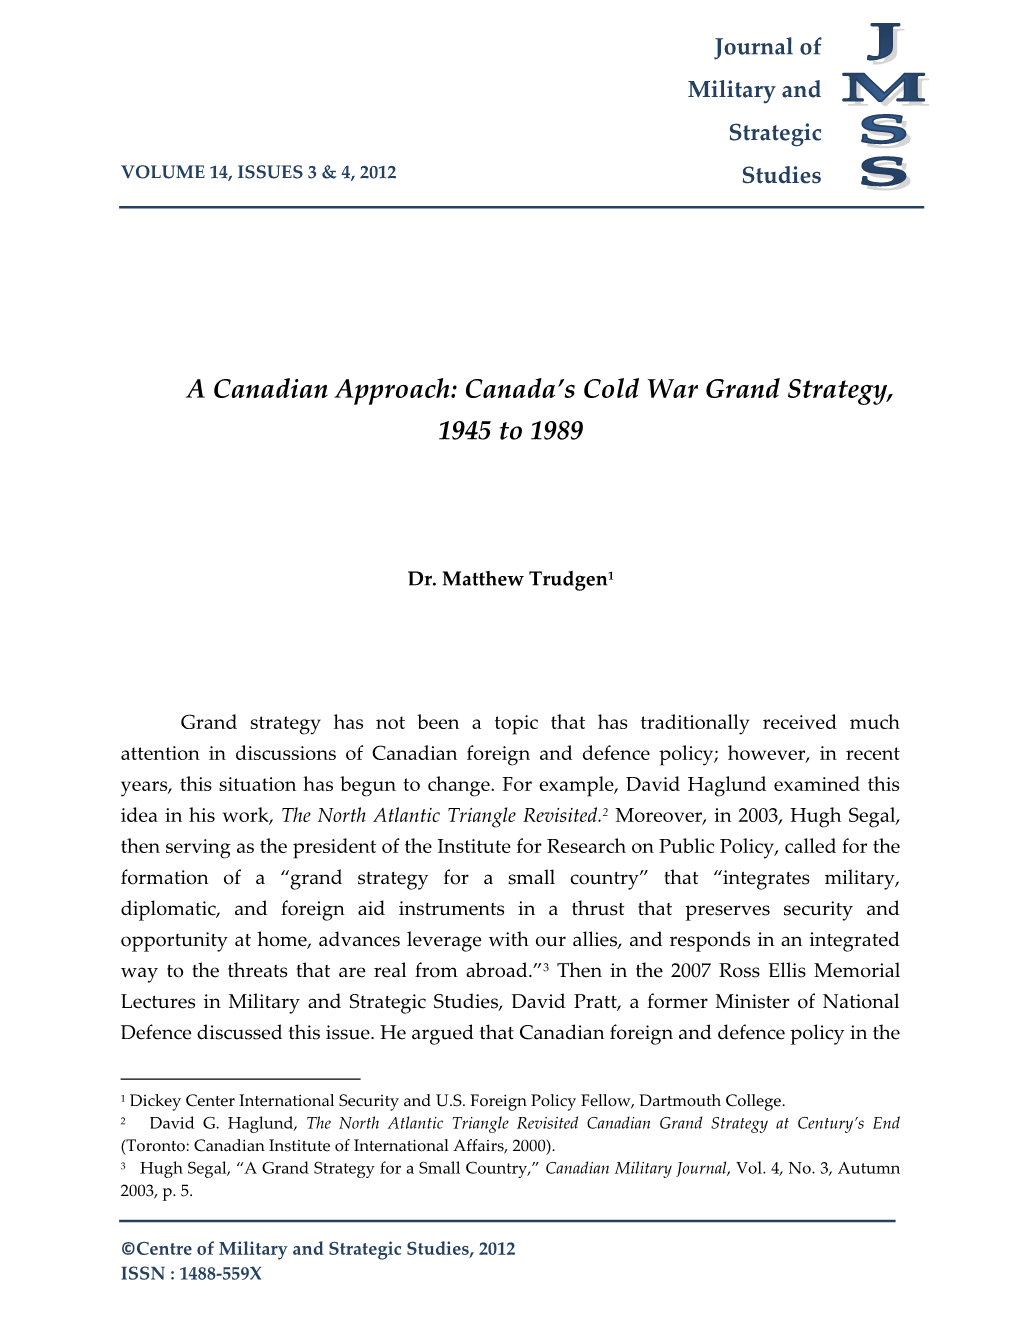 Canada's Cold War Grand Strategy, 1945 to 1989